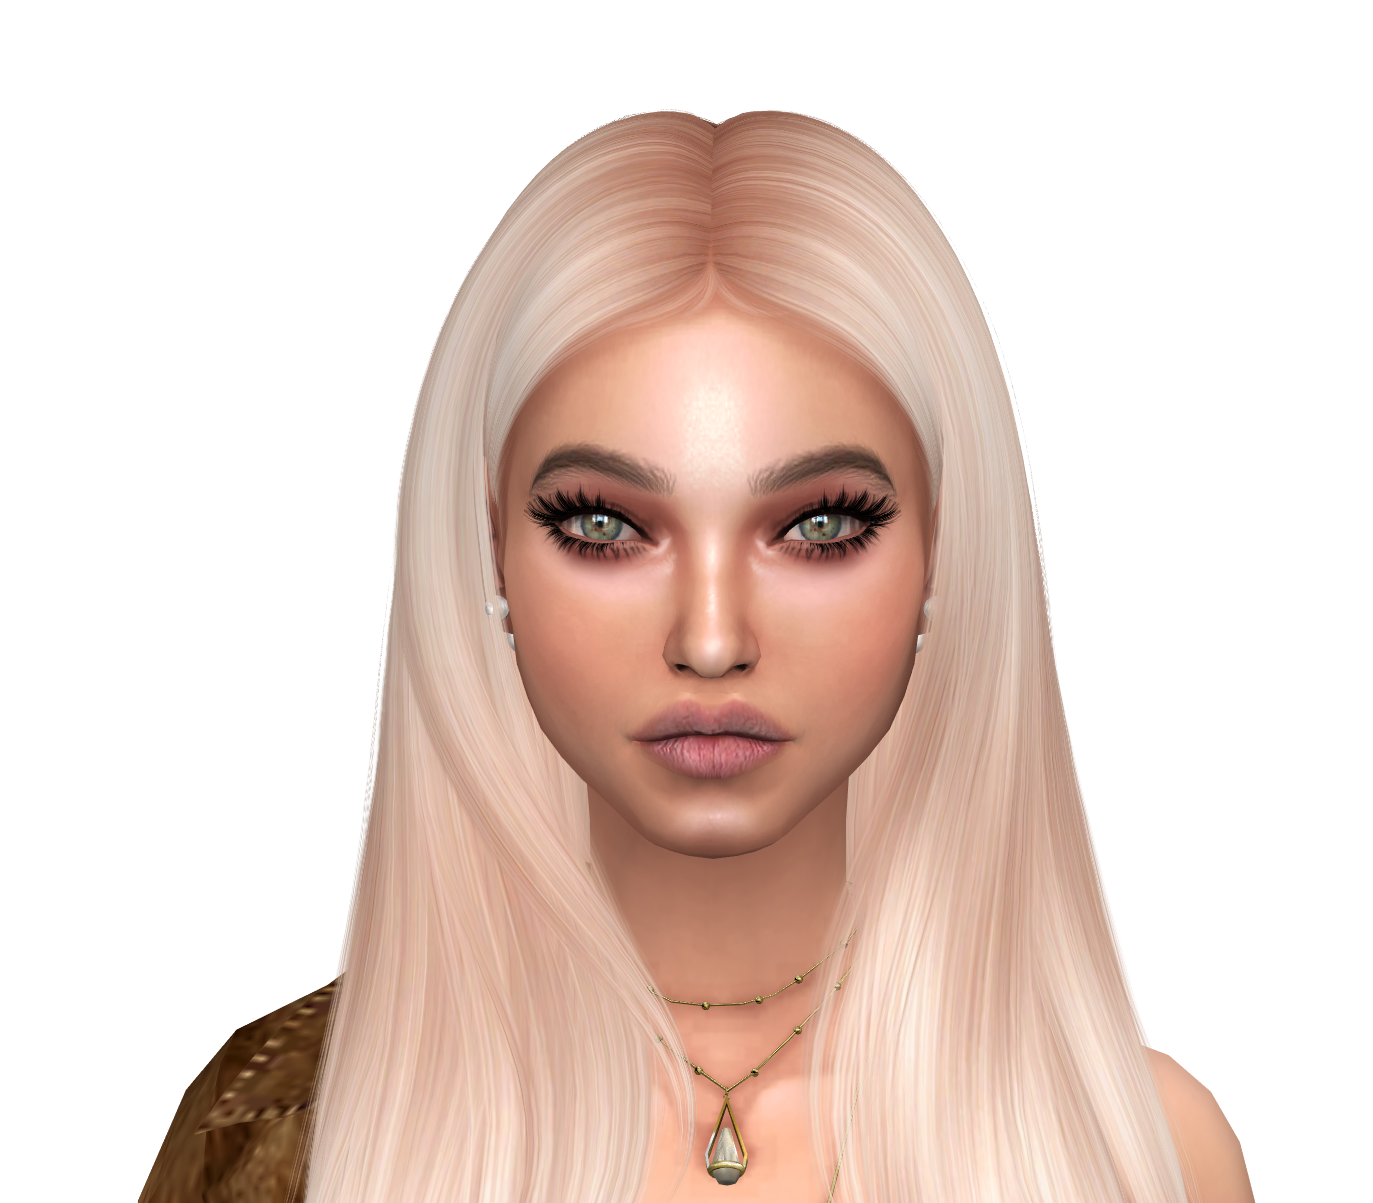 pretty girls created in the sims 4